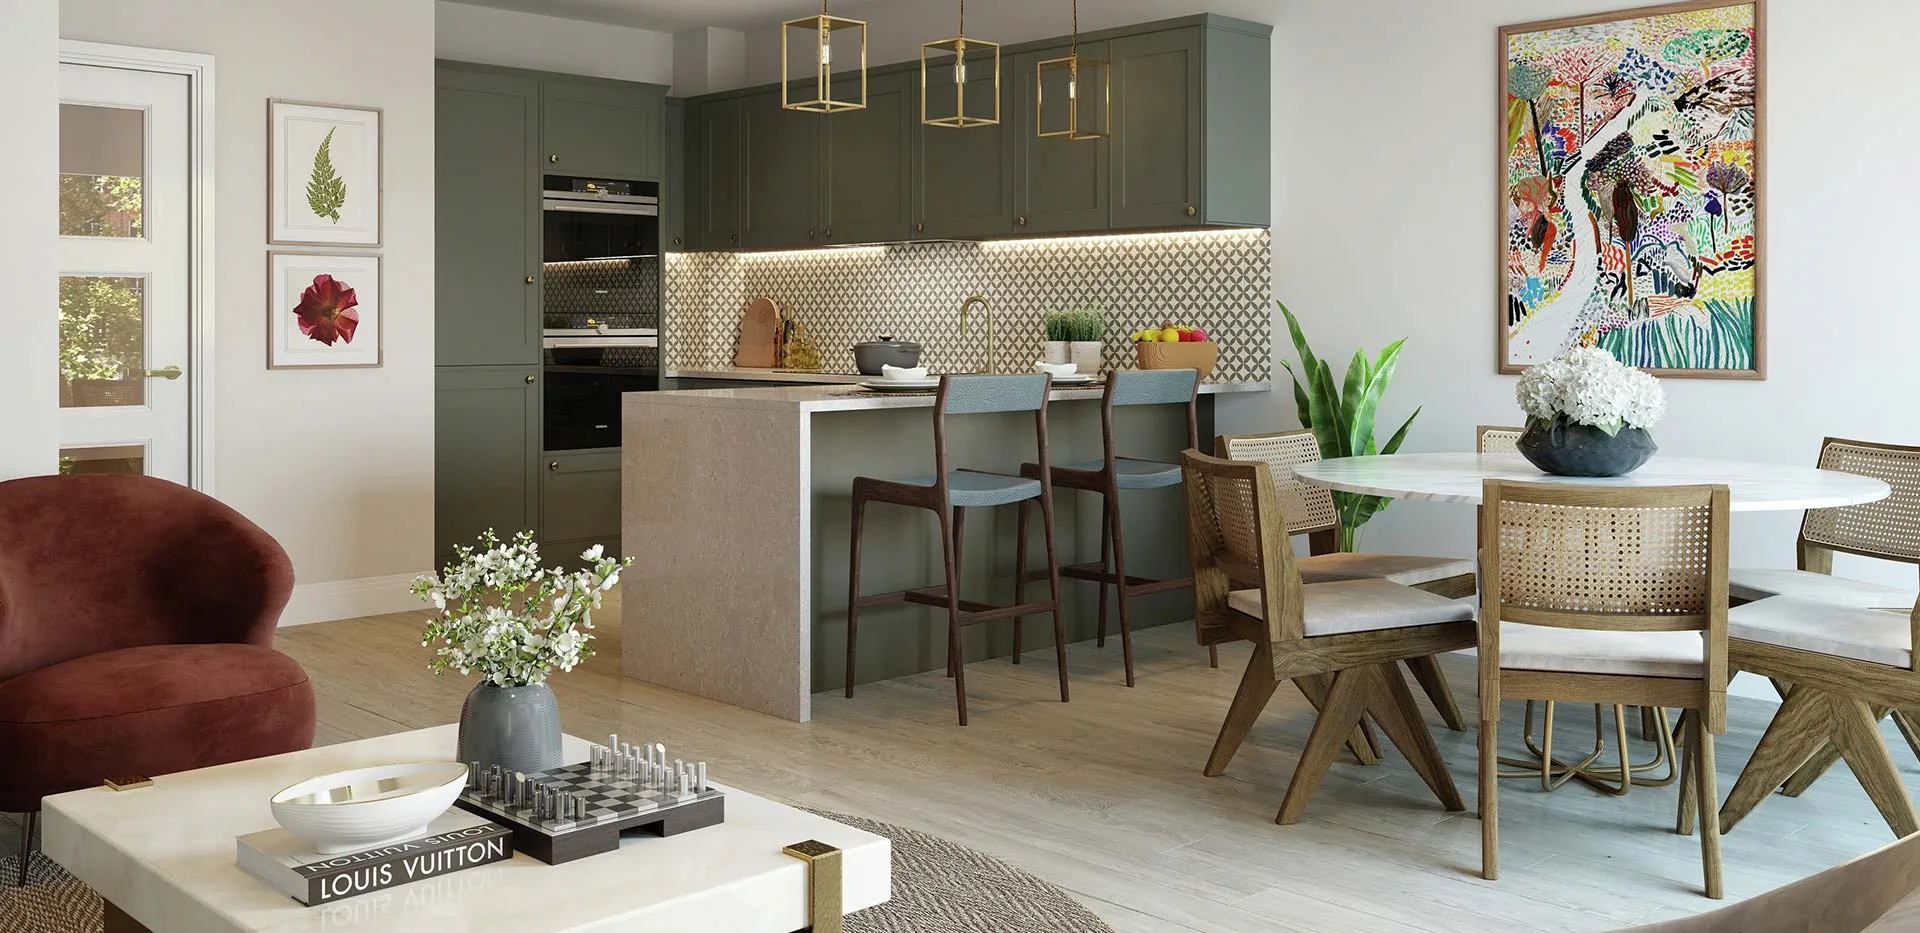 sunninghill-square-kitchen-and-dining-10052022